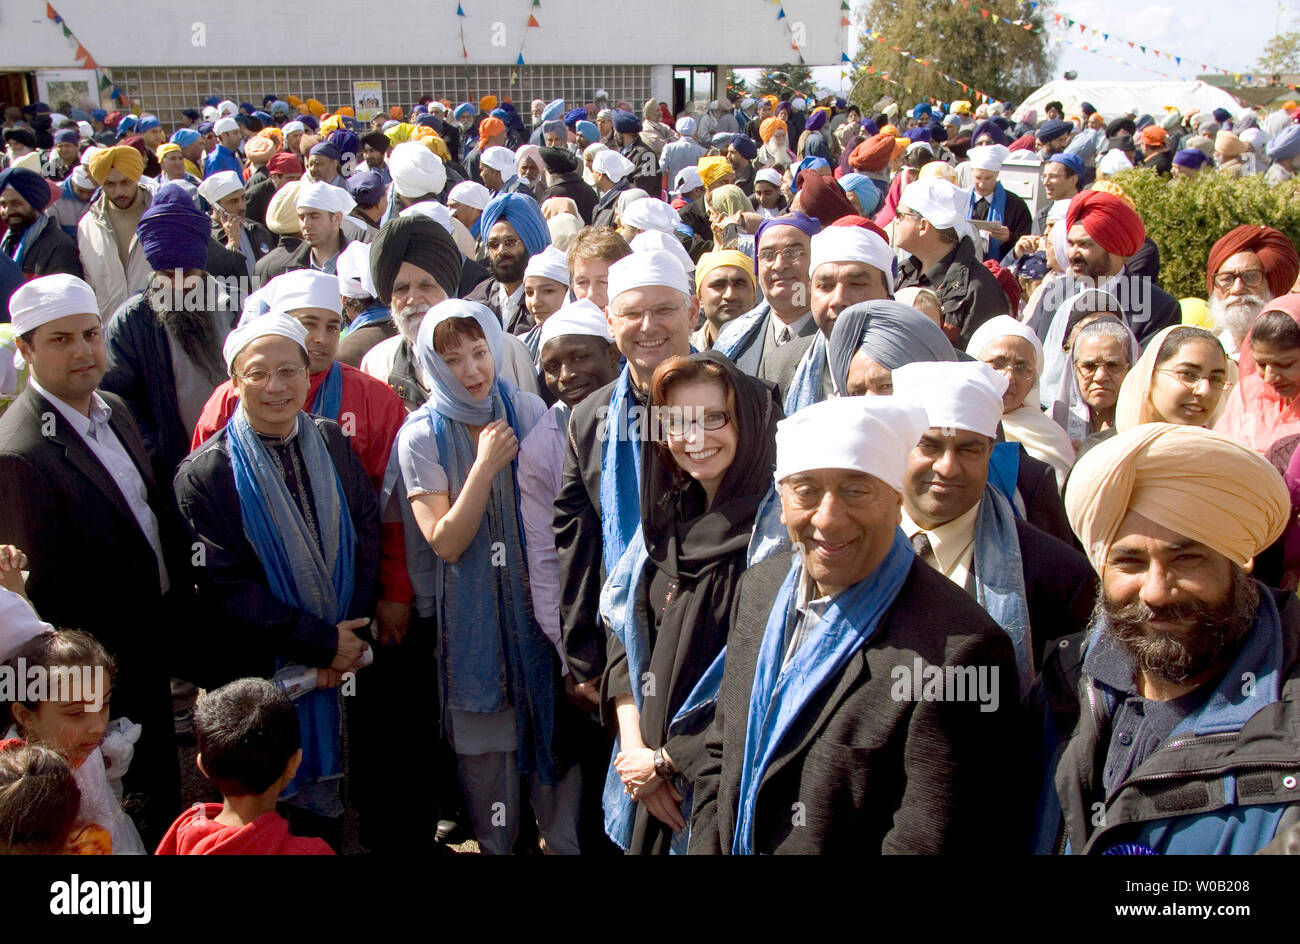 British Columbia (B.C.) Liberal Premier, Gordon Campbell (front center with wire rim glasses) stands behind star candidate Carol Taylor (dark rimmed glasses and black headcover), who recently resigned as chairperson of the Canadian Broadcast Corporation (CBC) to run in the Vancouver-Langara riding during the upcoming provincial election. Both Campbell and Taylor join tens of thousands of Sikhs waiting for the start of the Visakhi Parade from Vancouver's Ross Street Temple, April 16, 2005. One of the largest celebrations of it's kind in North America, Visakhi is the festival of harvest after wi Stock Photo